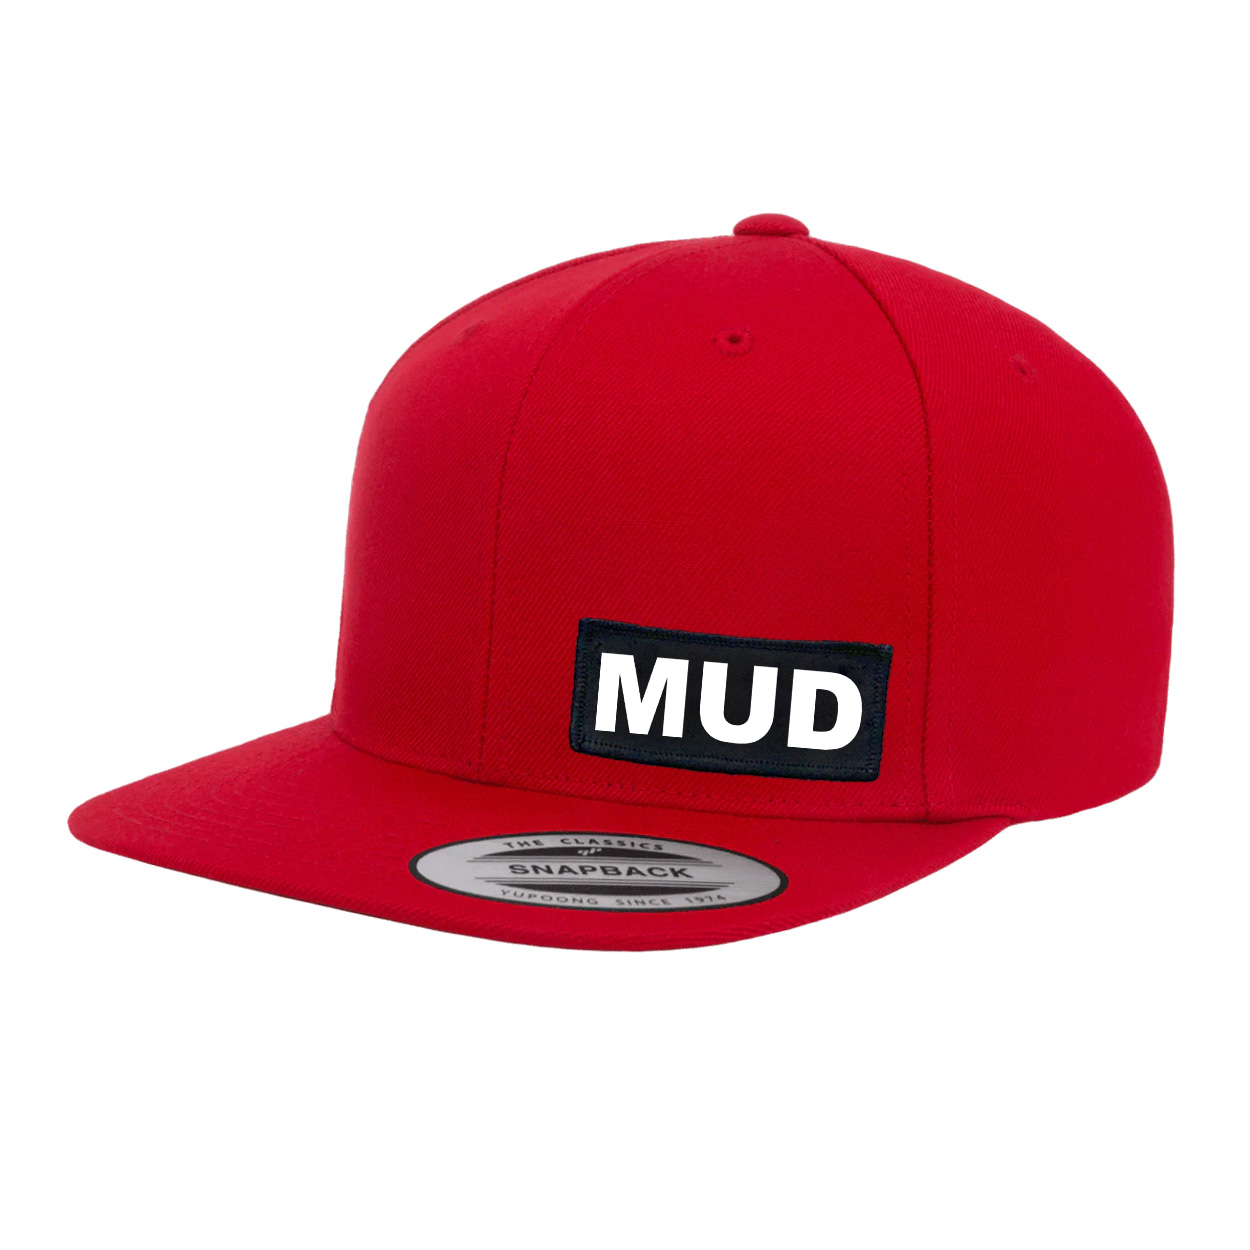 Mud Brand Logo Night Out Woven Patch Snapback Flat Brim Hat Red 